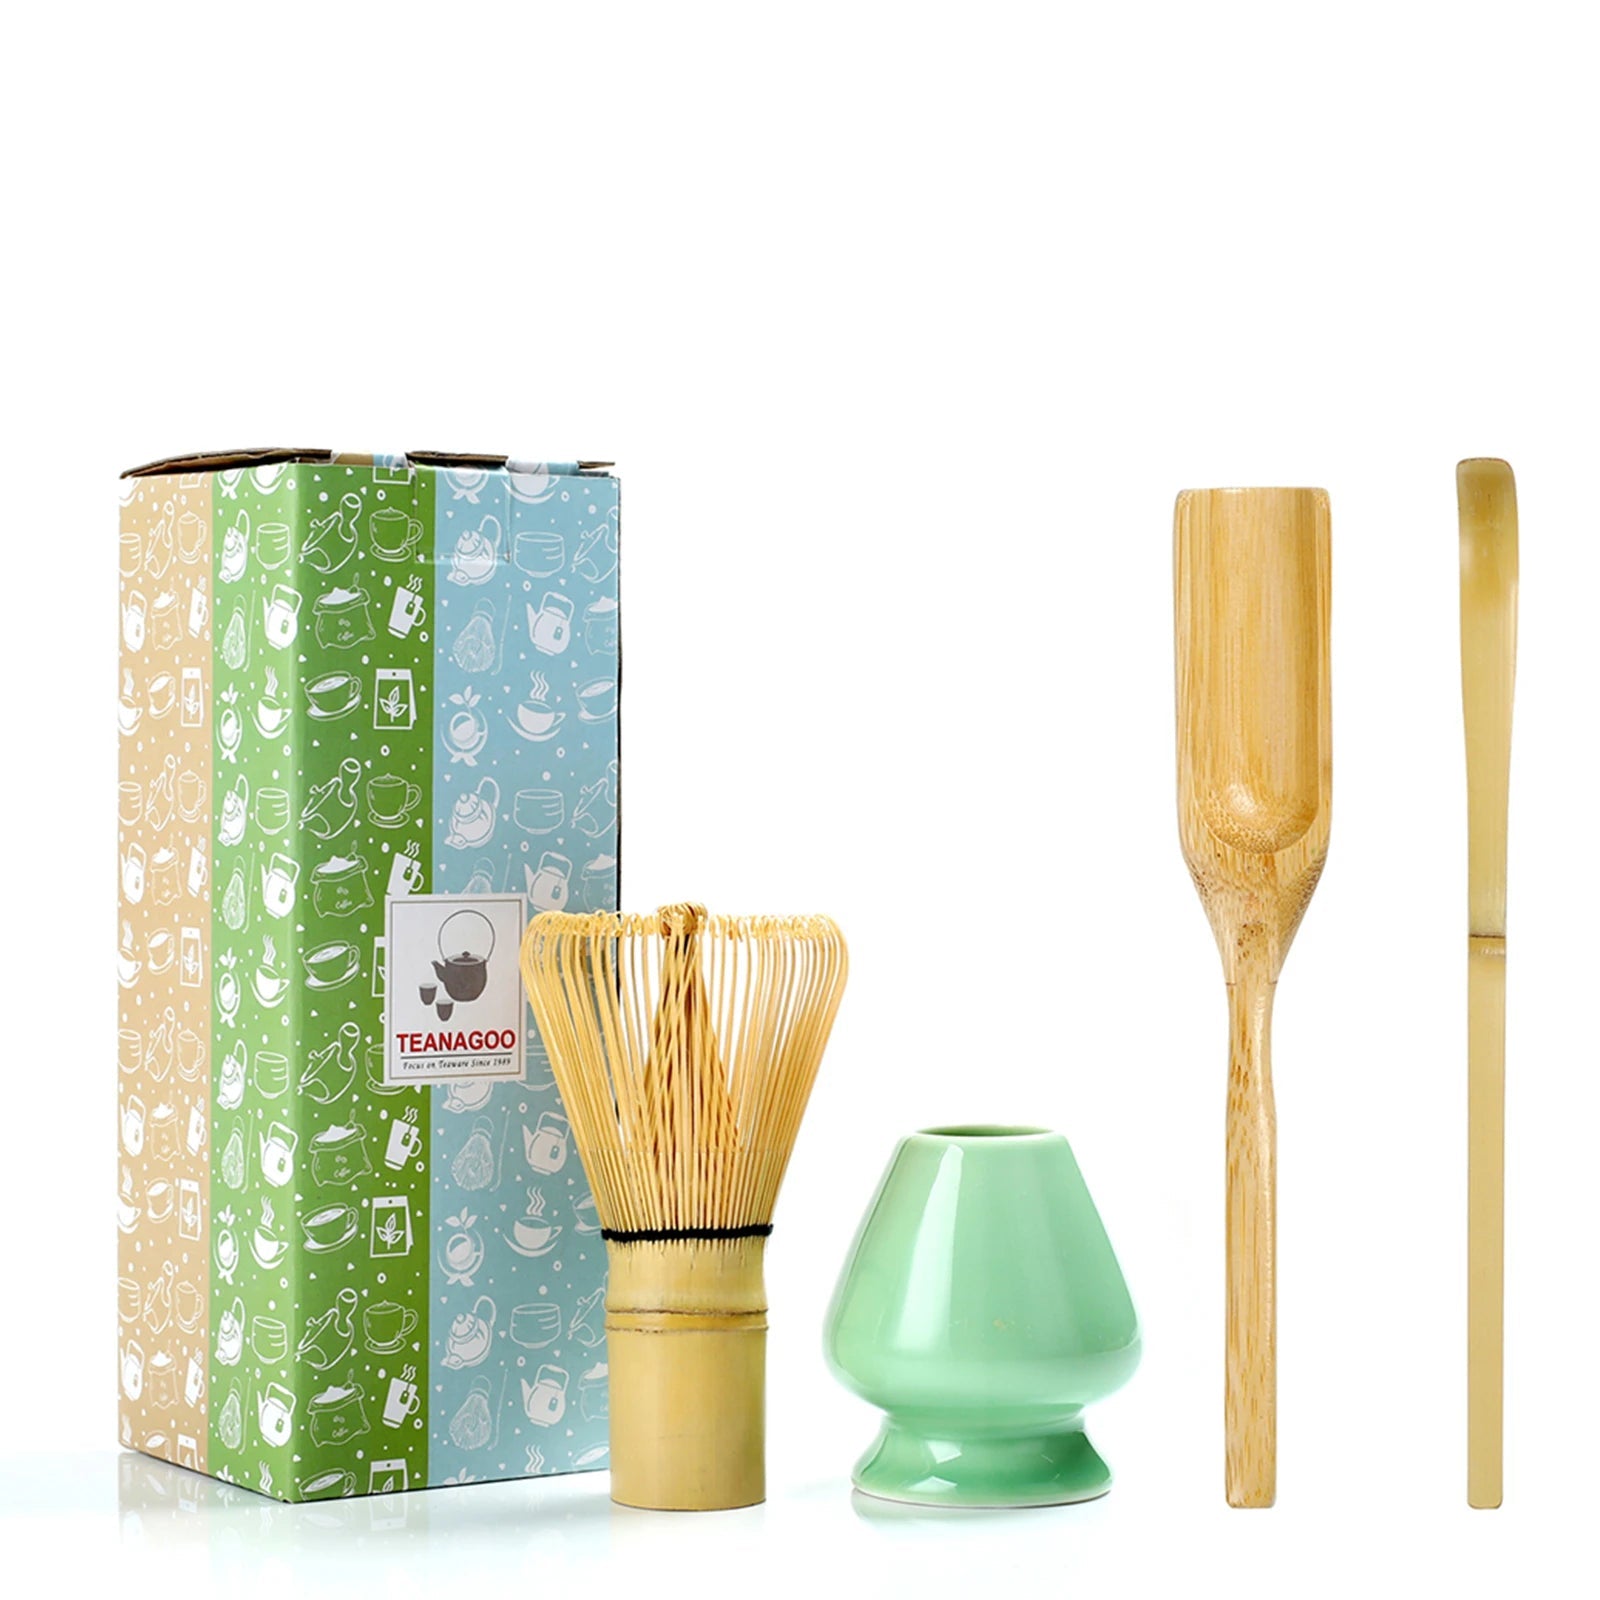 TEANAGOO MA-01 Japanese Matcha Ceremony Accessory, Matcha Whisk Chasen, Traditional Scoop chashaku, Tea Spoon, Whisk Holder, The Perfect Set to PR